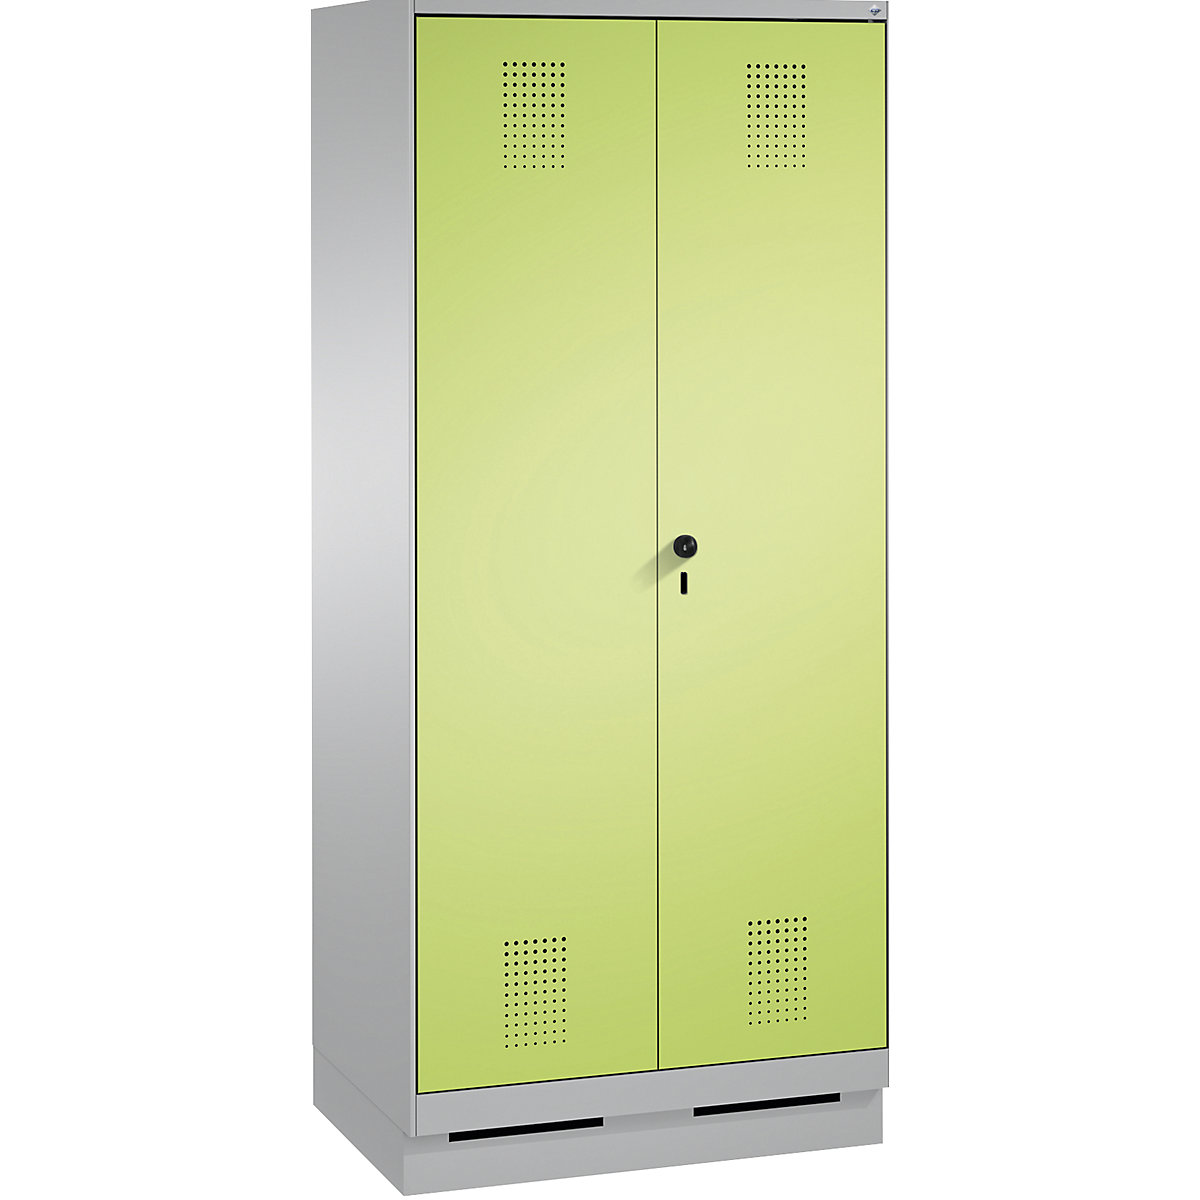 EVOLO laundry cupboard / cloakroom locker – C+P, 4 shelves, clothes rail, compartments 2 x 400 mm, with plinth, white aluminium / viridian green-3